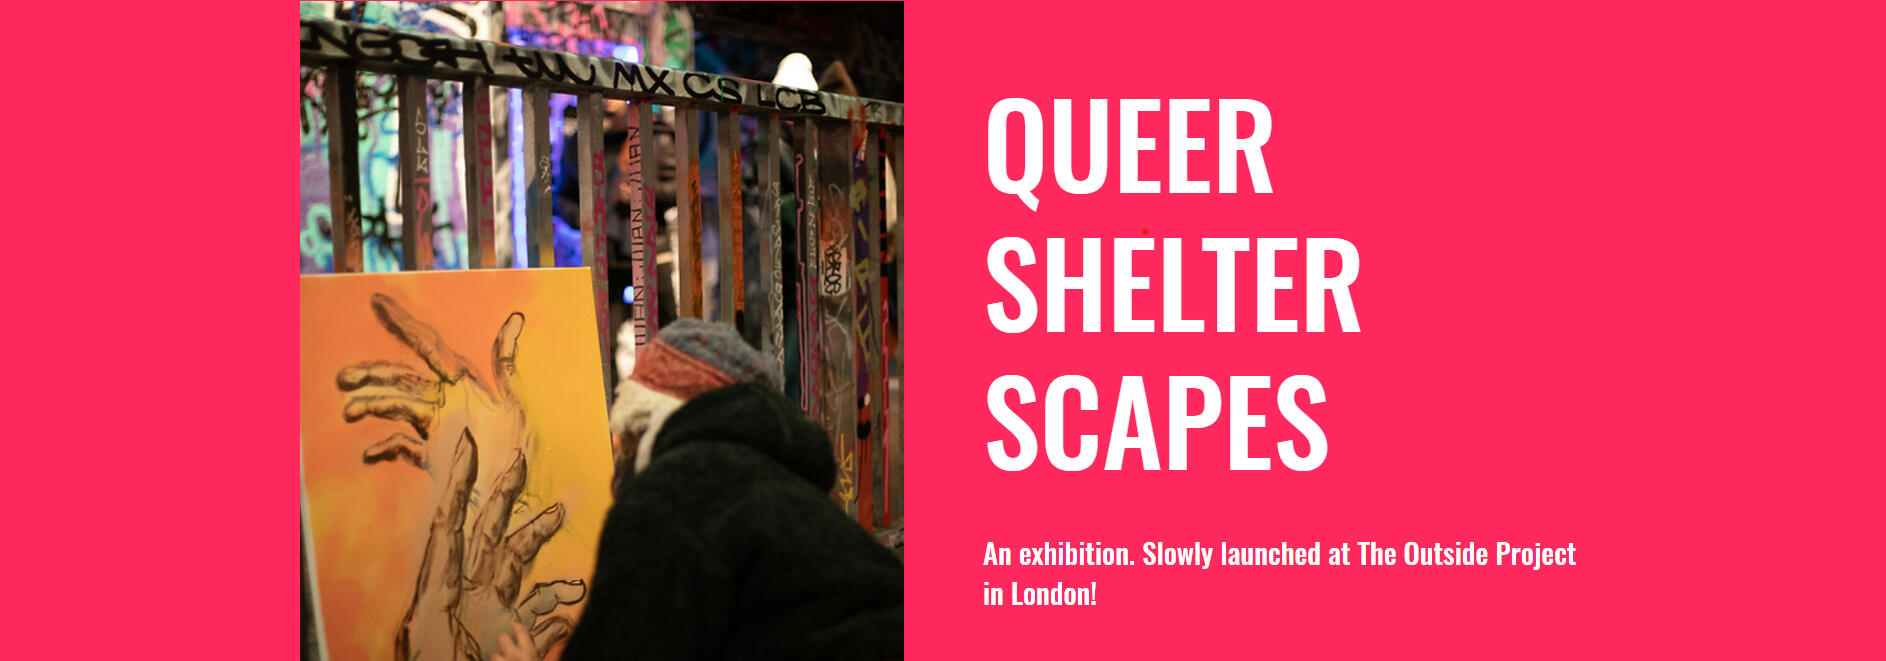 Queer Shelter-Scapes exhibition